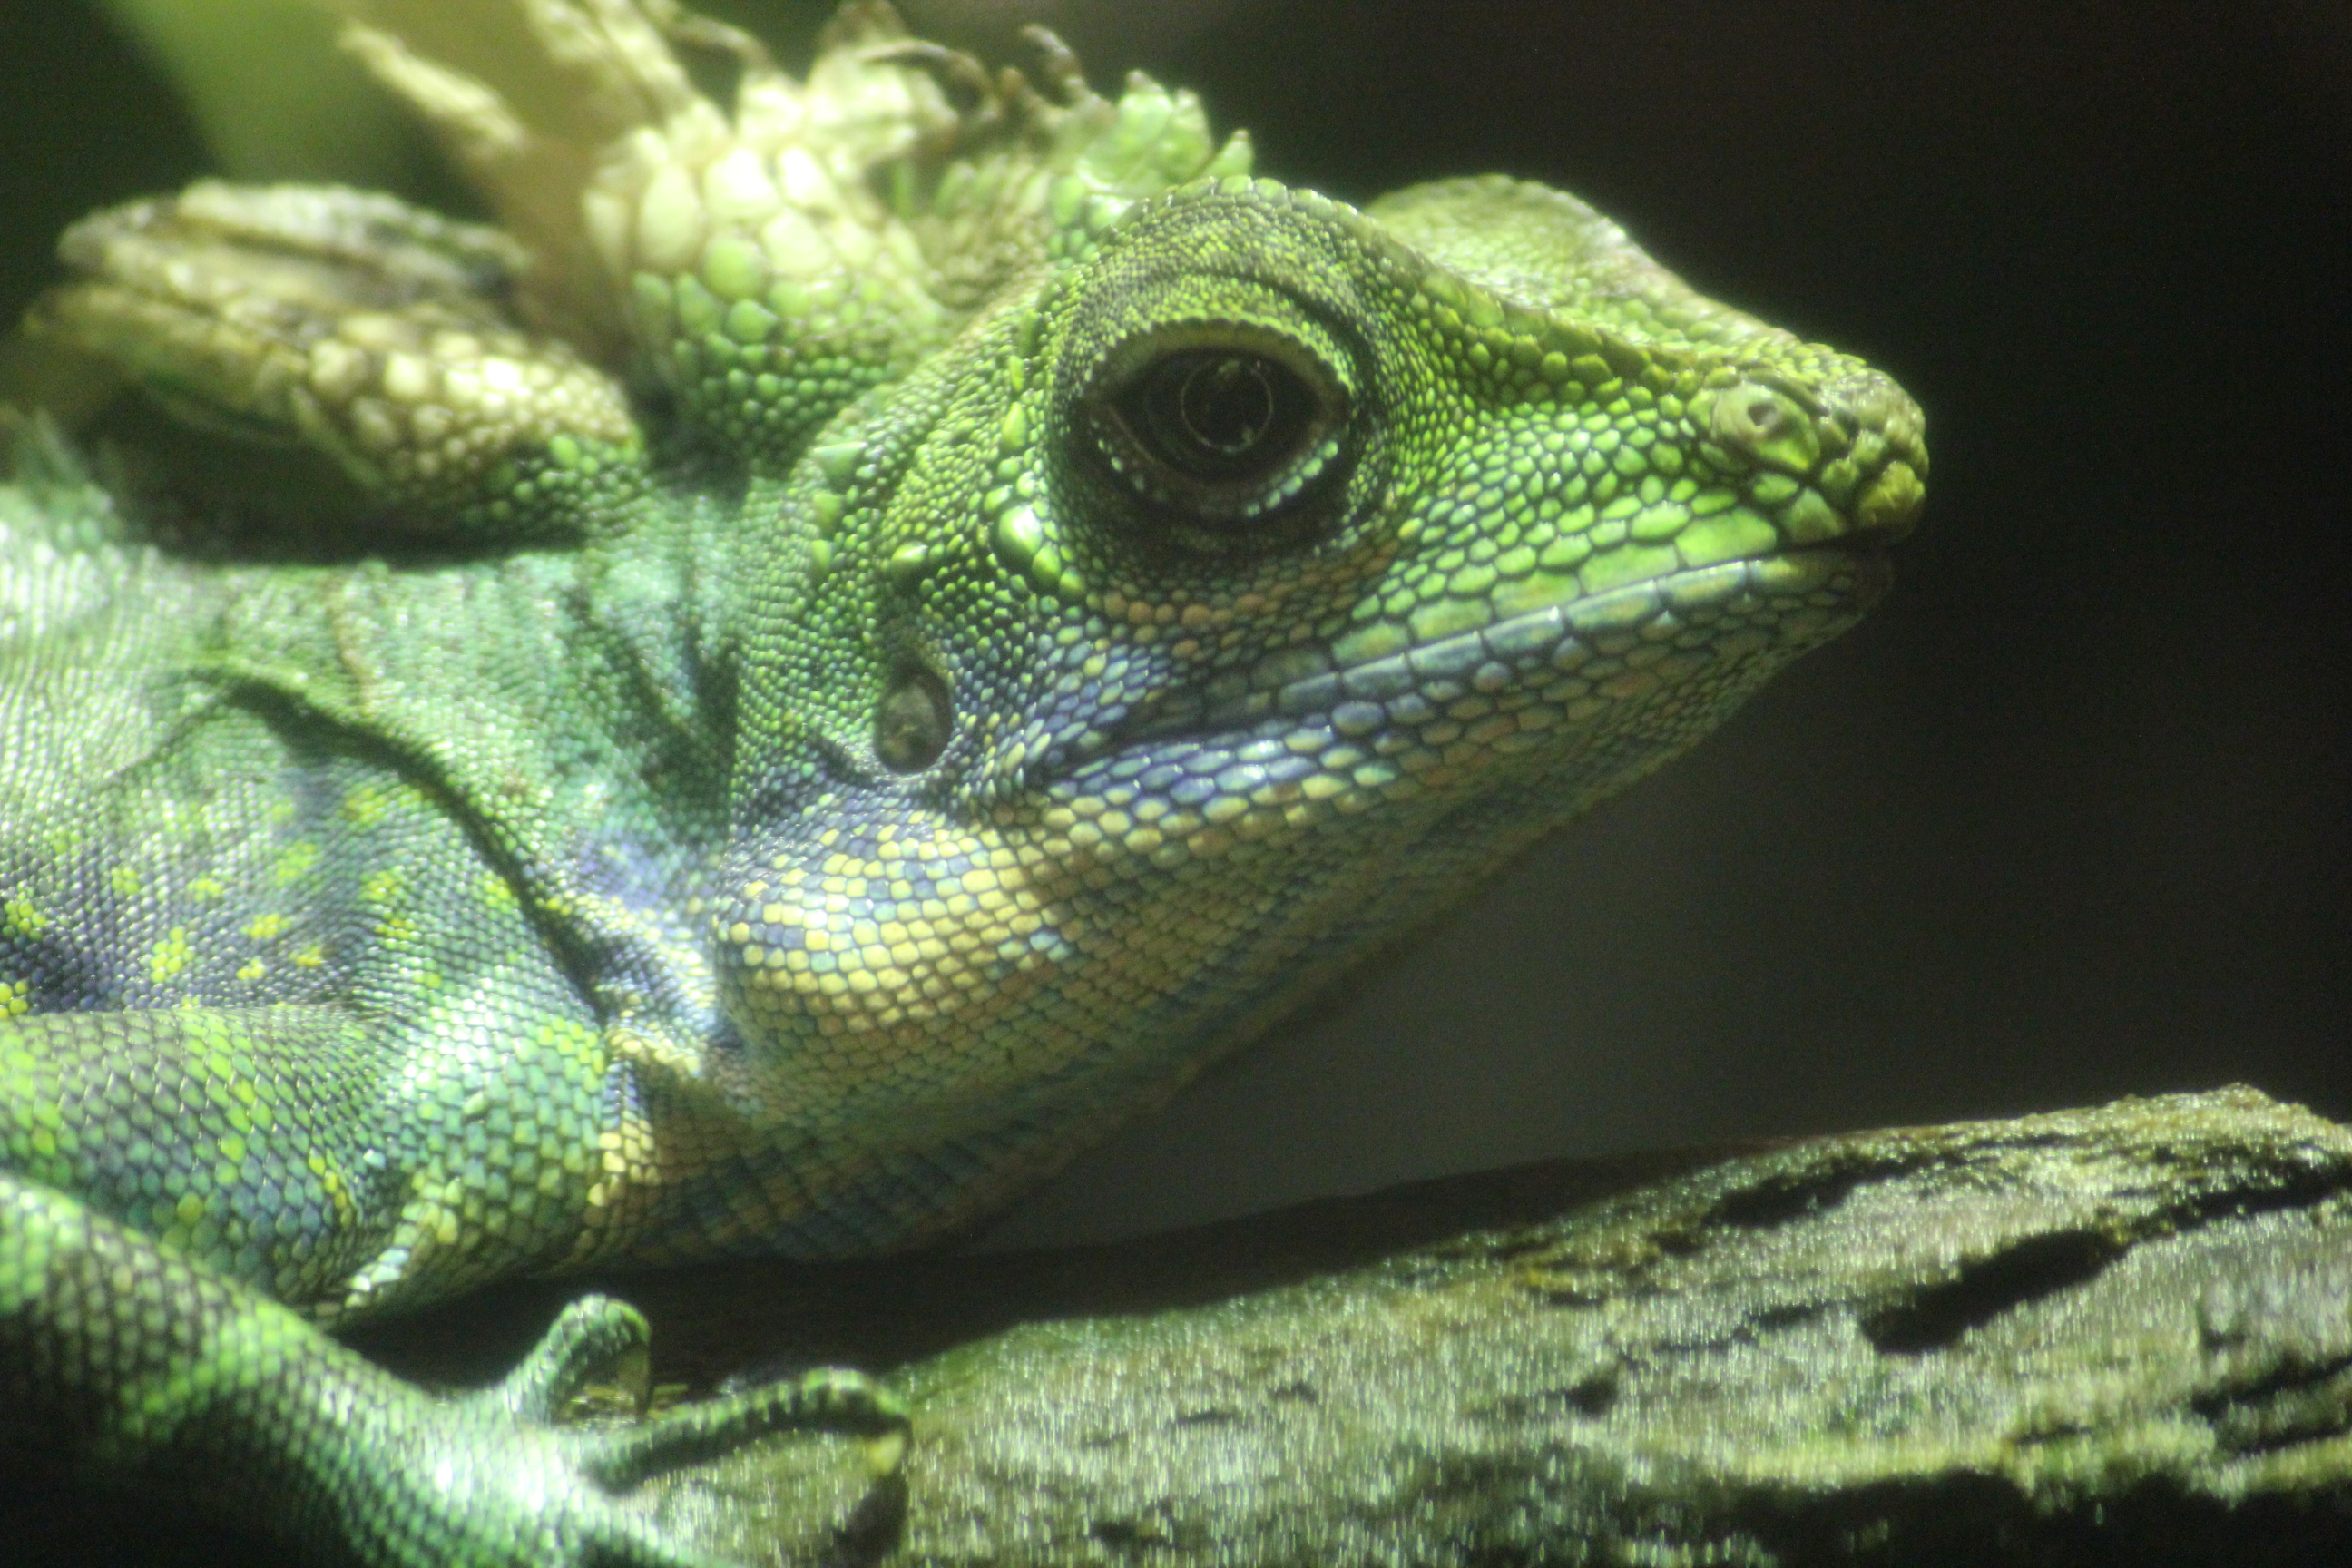 HERPETOLOGY - Amphibians and Reptiles